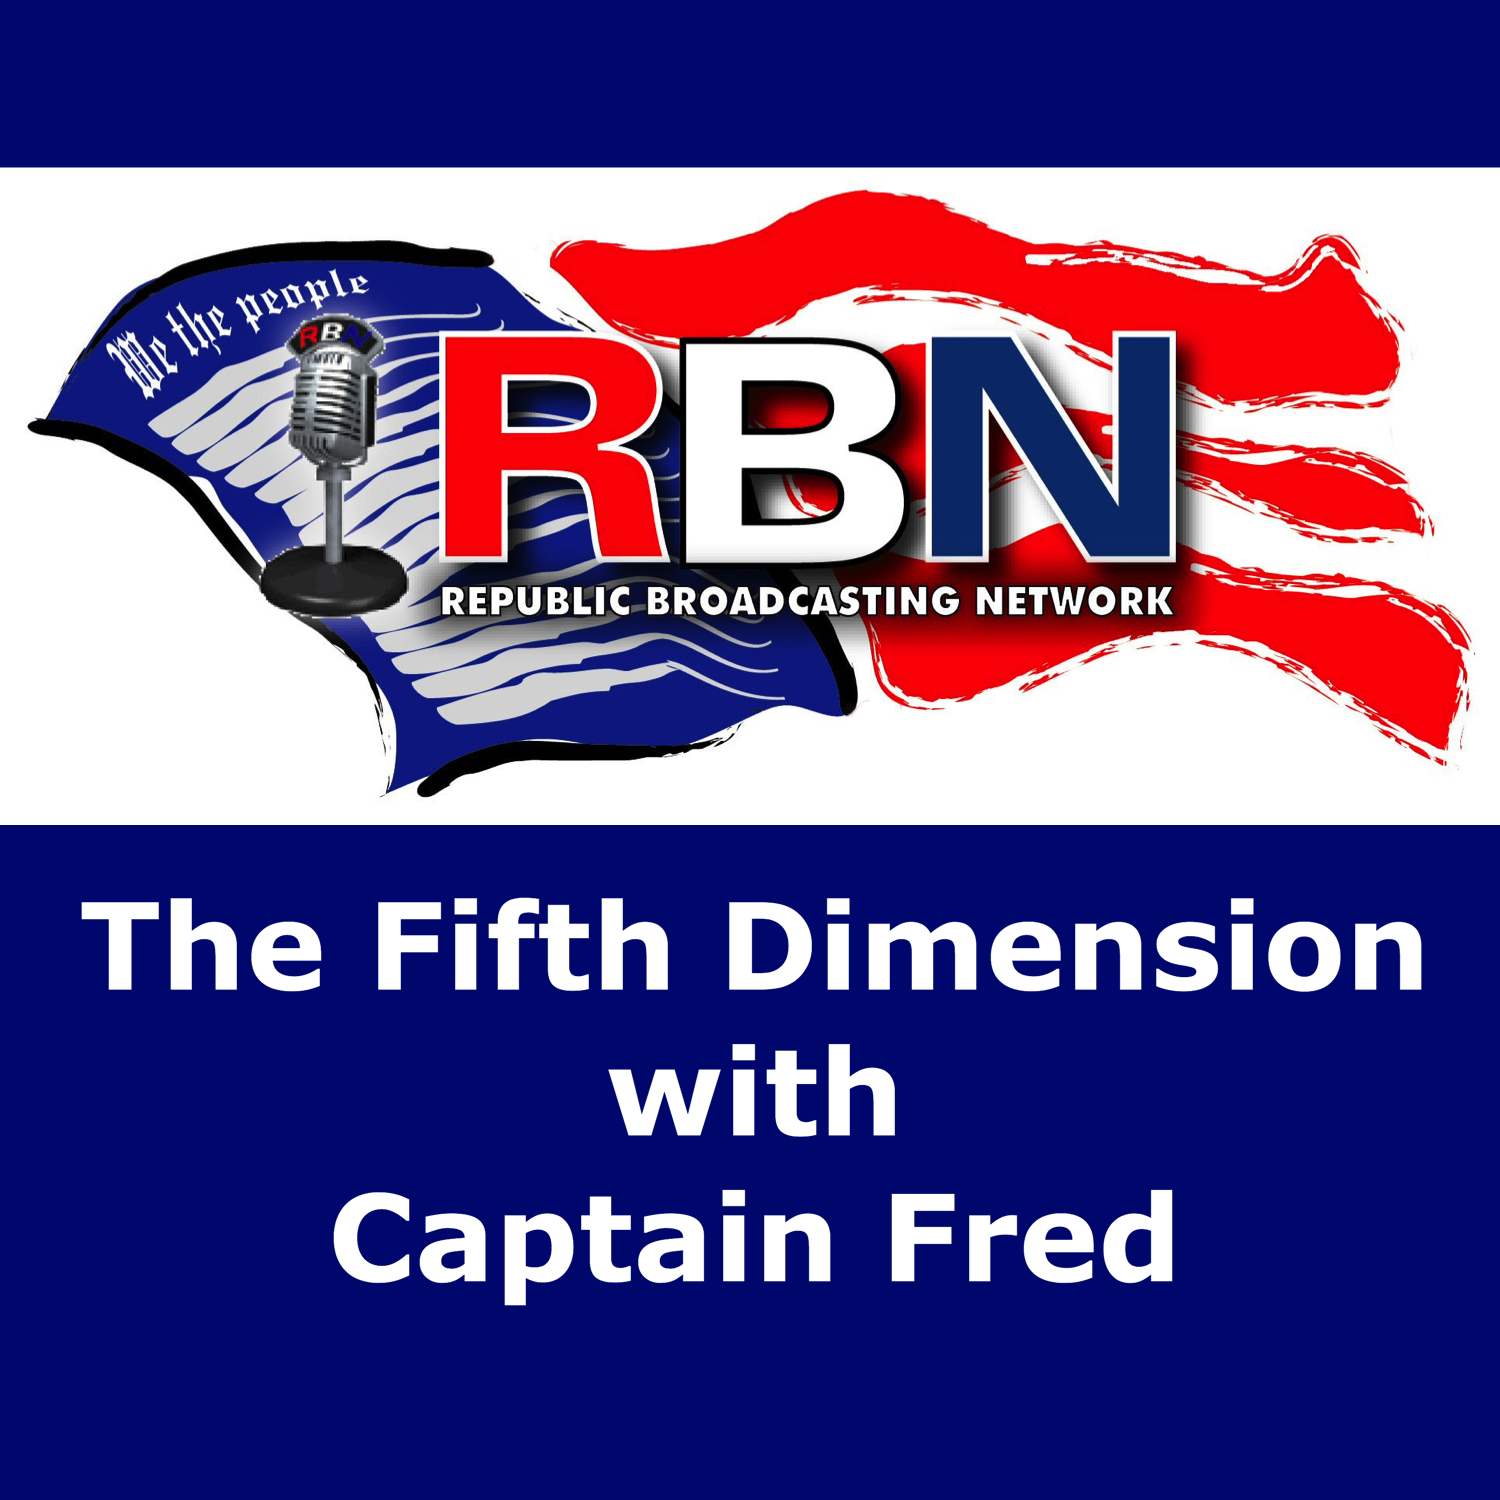 The 5th Dimension with Captain Fred